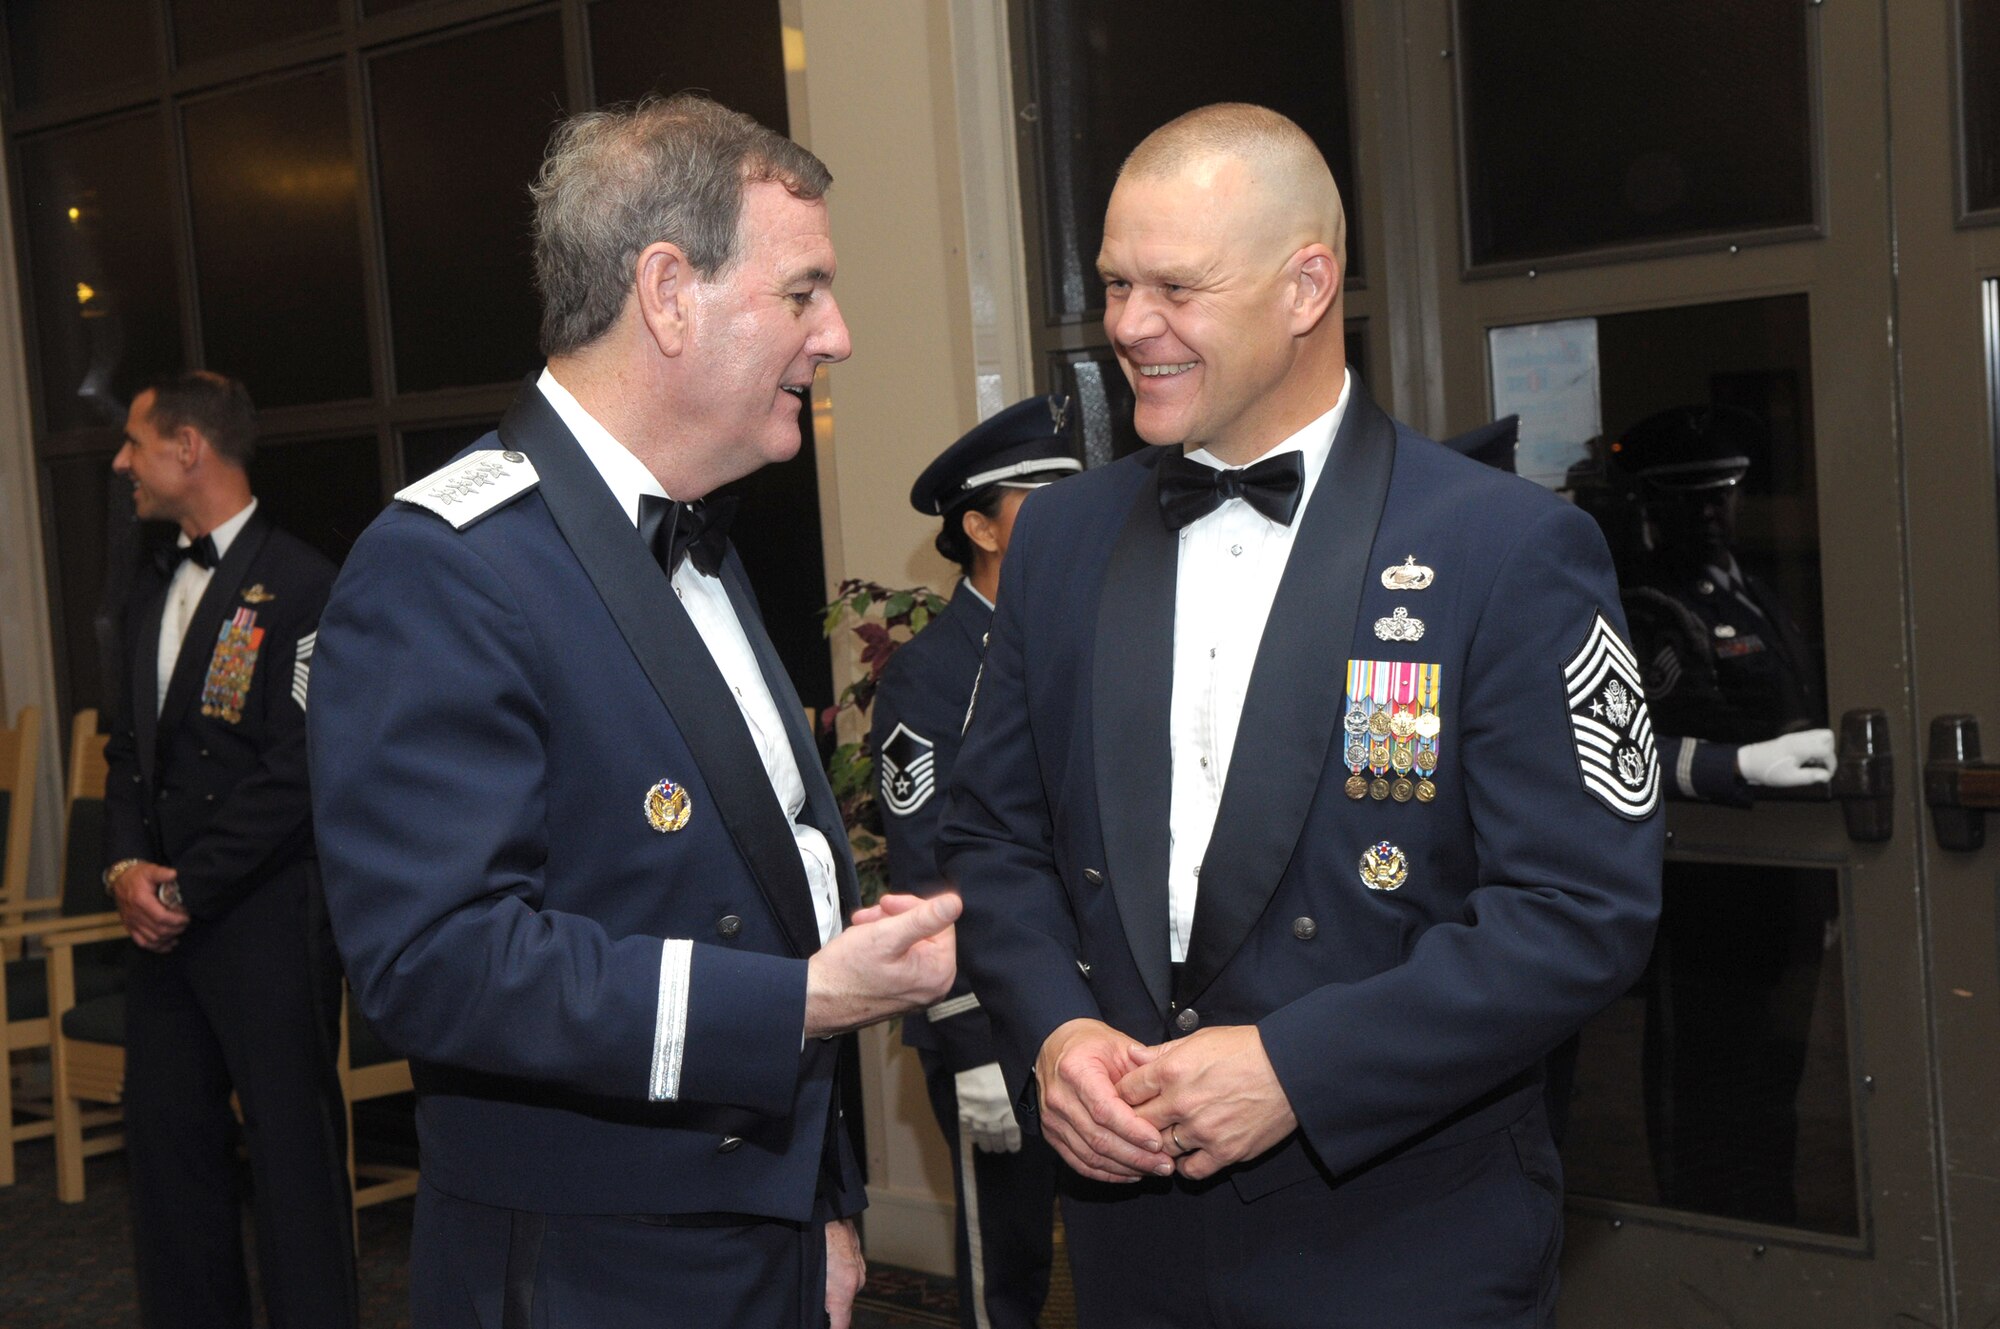 Gen. Stephen R. Lorenz talks with Chief Master Sgt. of the Air Force James A. Roy July 16, 2010 after his induction into the Order of the Sword at the Gateway Club on Lackland Air Force Base, Texas. General Lorenz is the Air Education and Training Command commander. (U.S. Air Force photo/Joel Martinez)